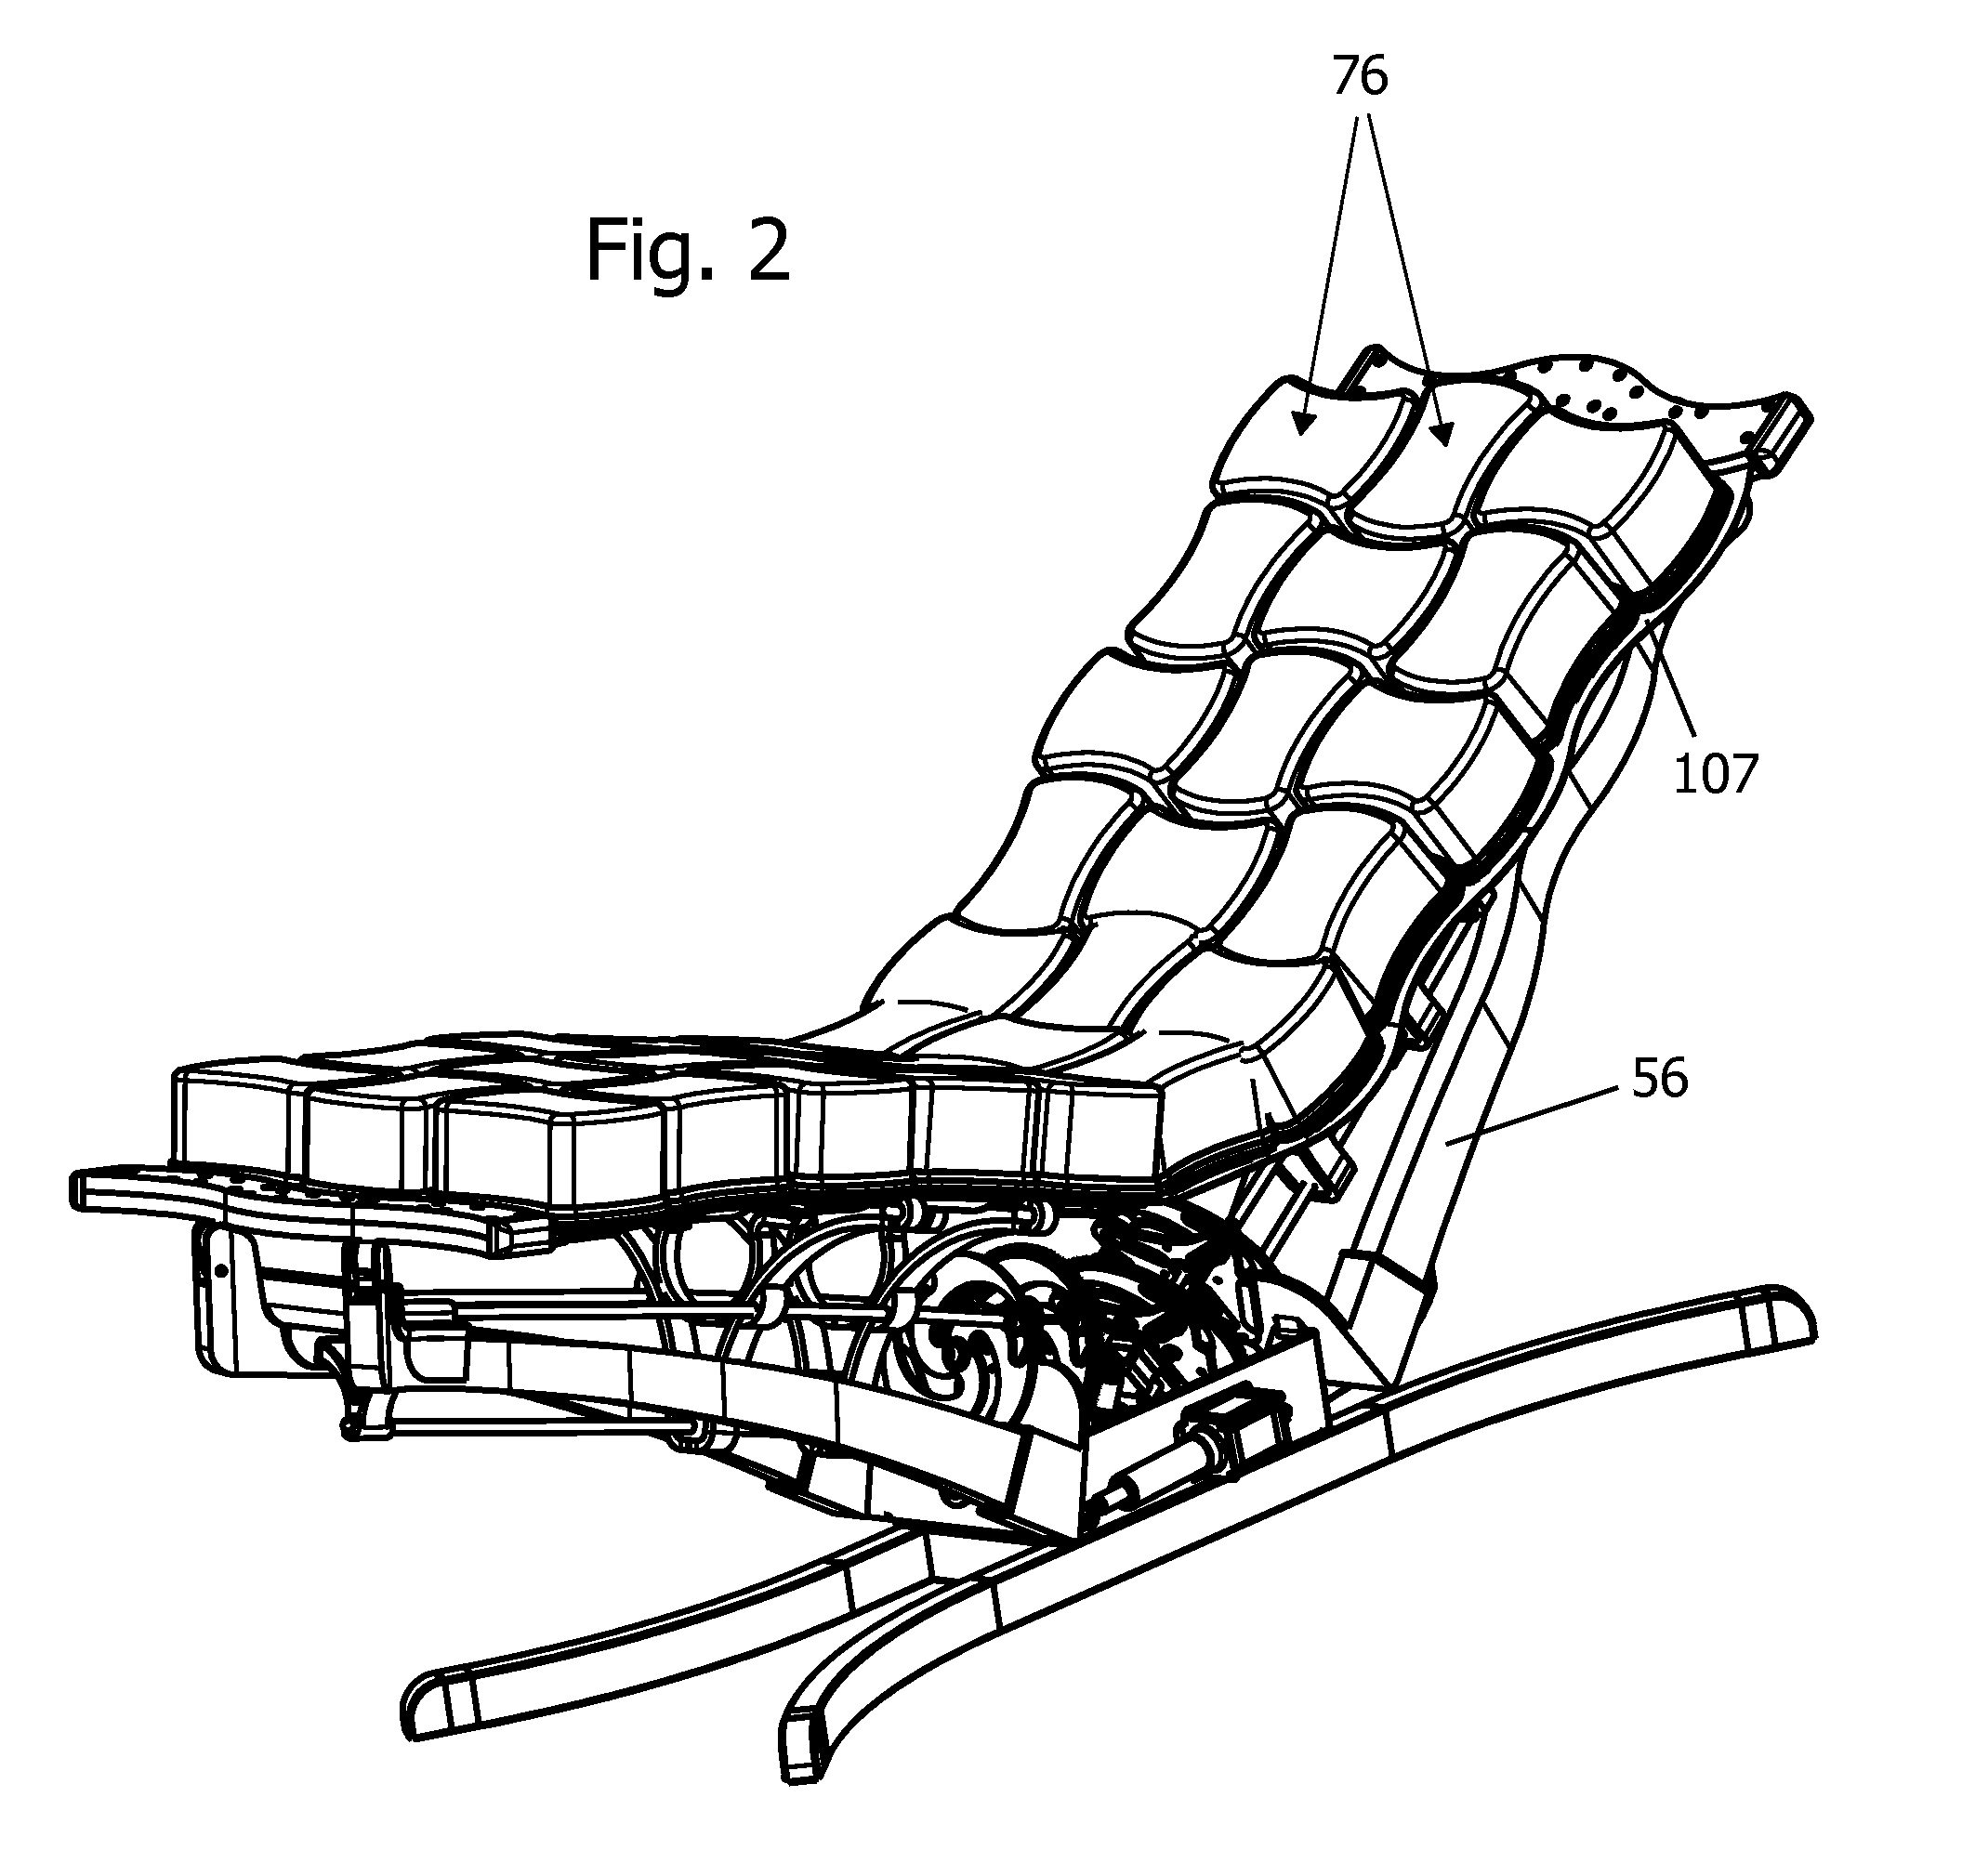 Multi layered modular support system for lounge and other applications